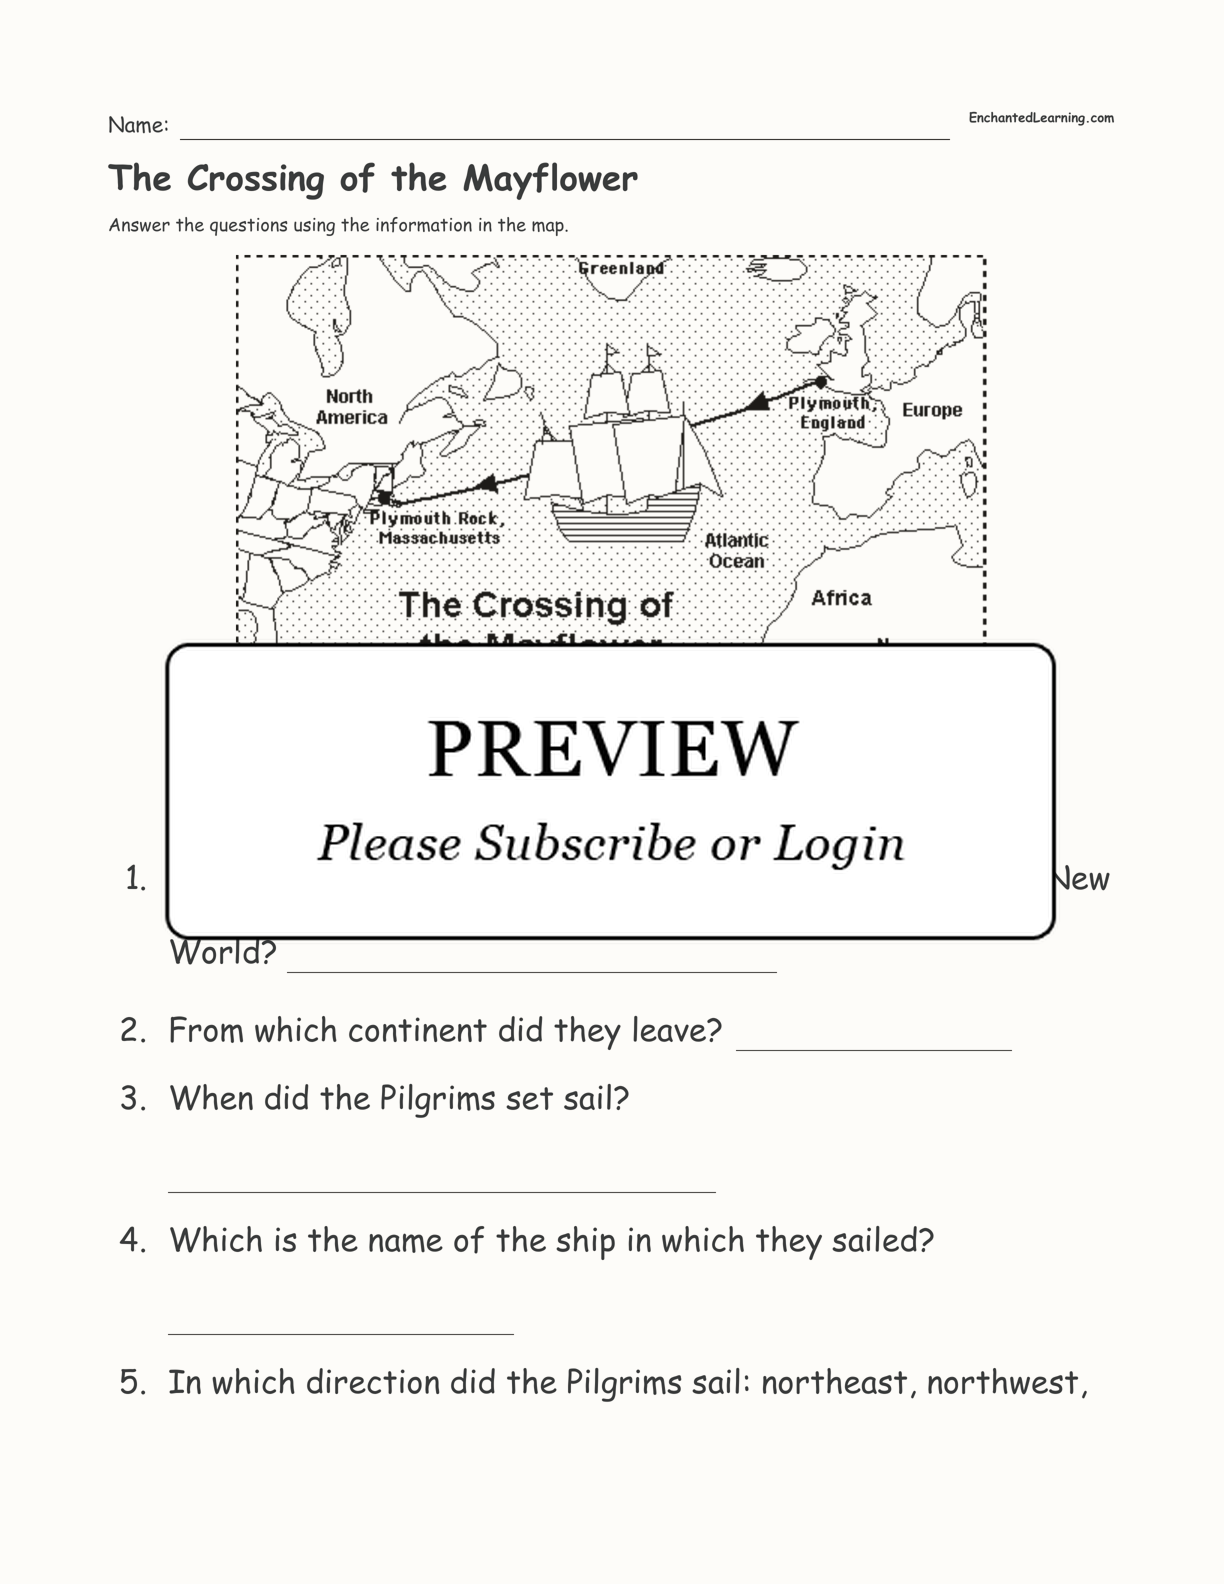 The Crossing of the Mayflower interactive worksheet page 1